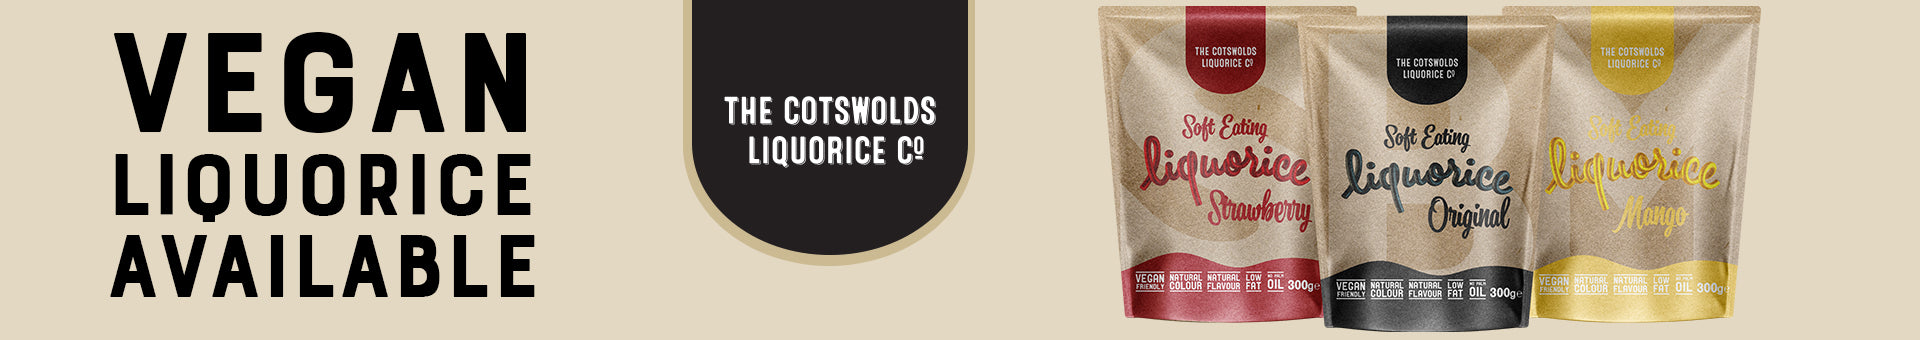 Vegan Liquorice Pouches from The Cotswolds Liquorice Co